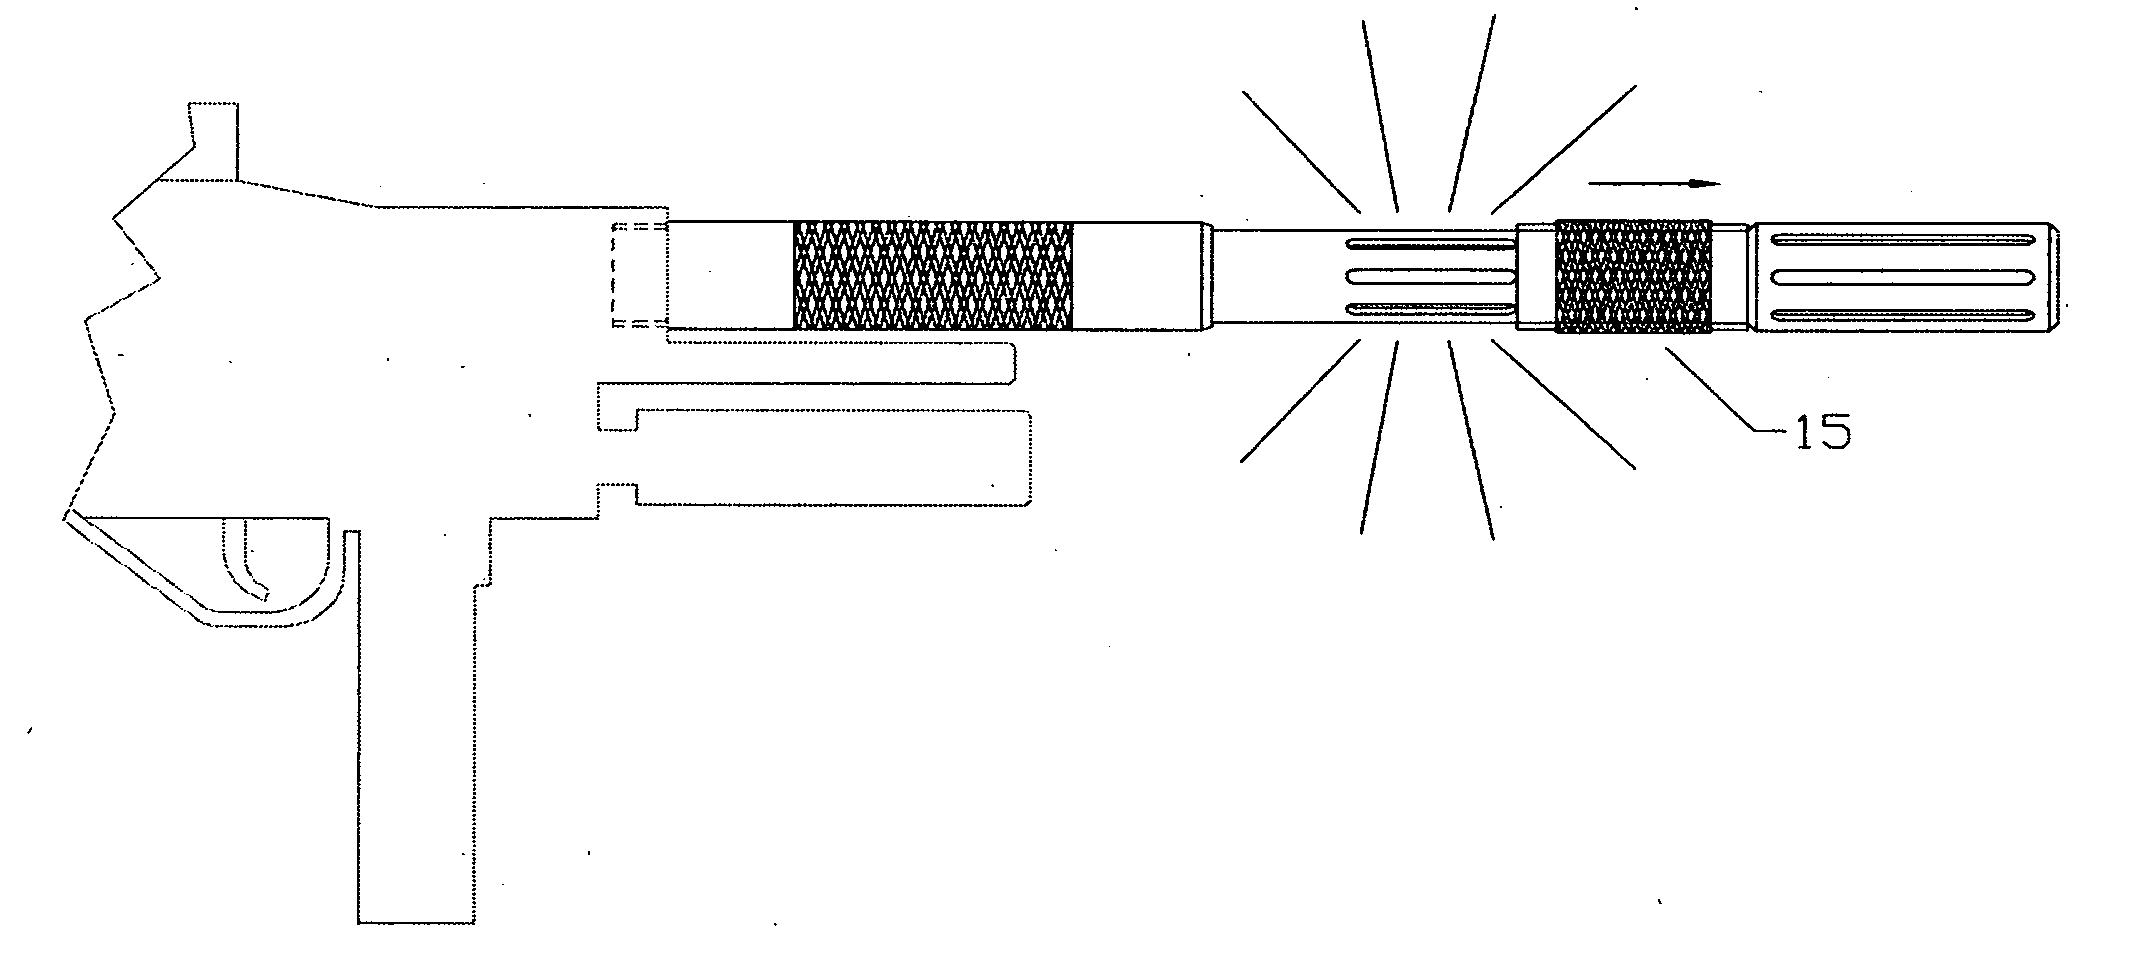 Paintball gun barrel modification and associated mechanism to allow for removal of ruptured paint ball material during game or other battle type operation